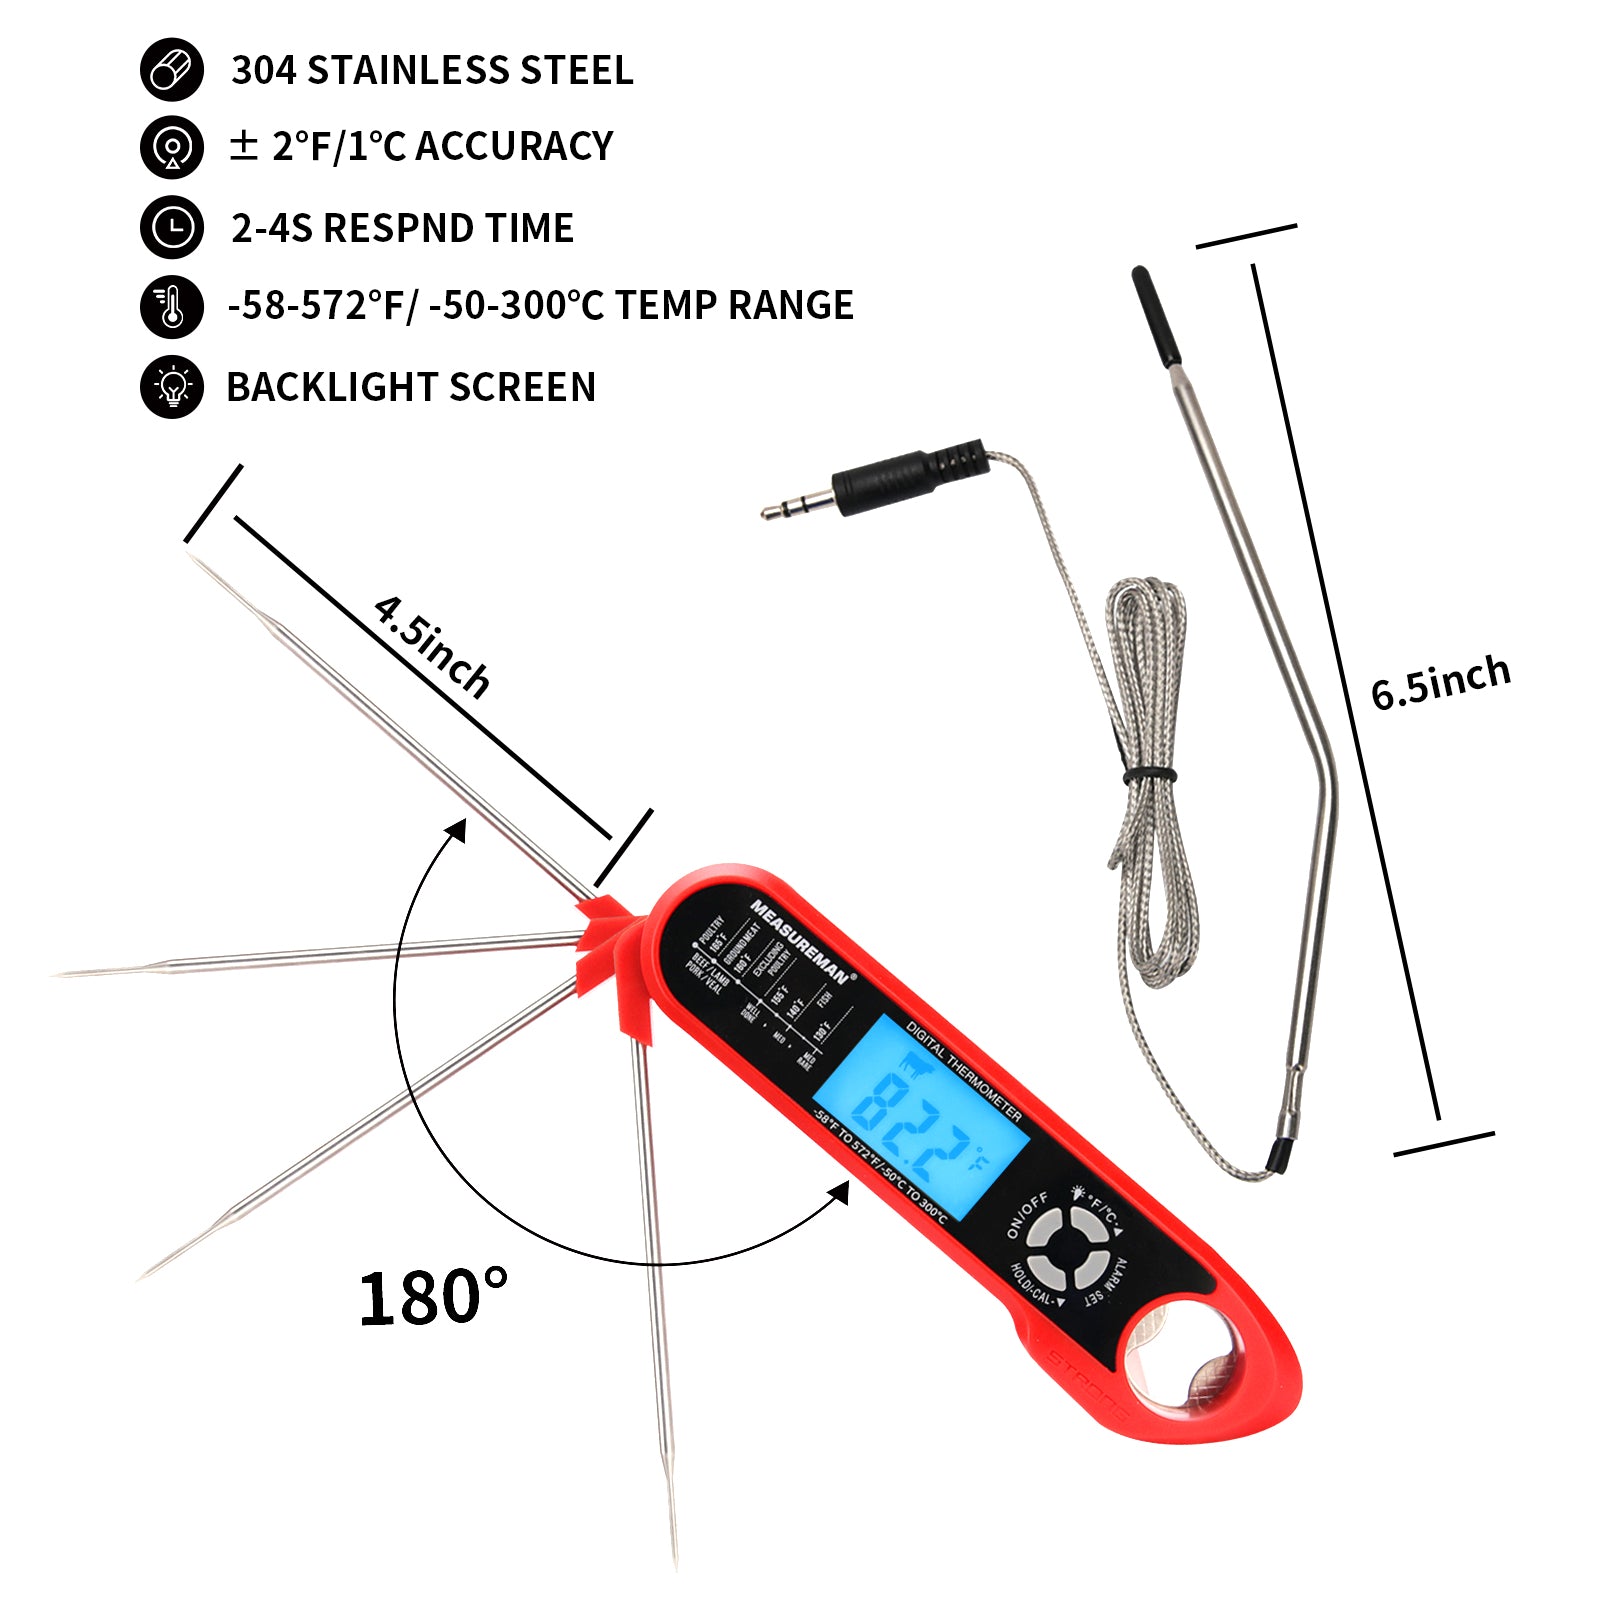 Oven Safe Leave In Meat Thermometer Instant Read, 2 In 1 Dual